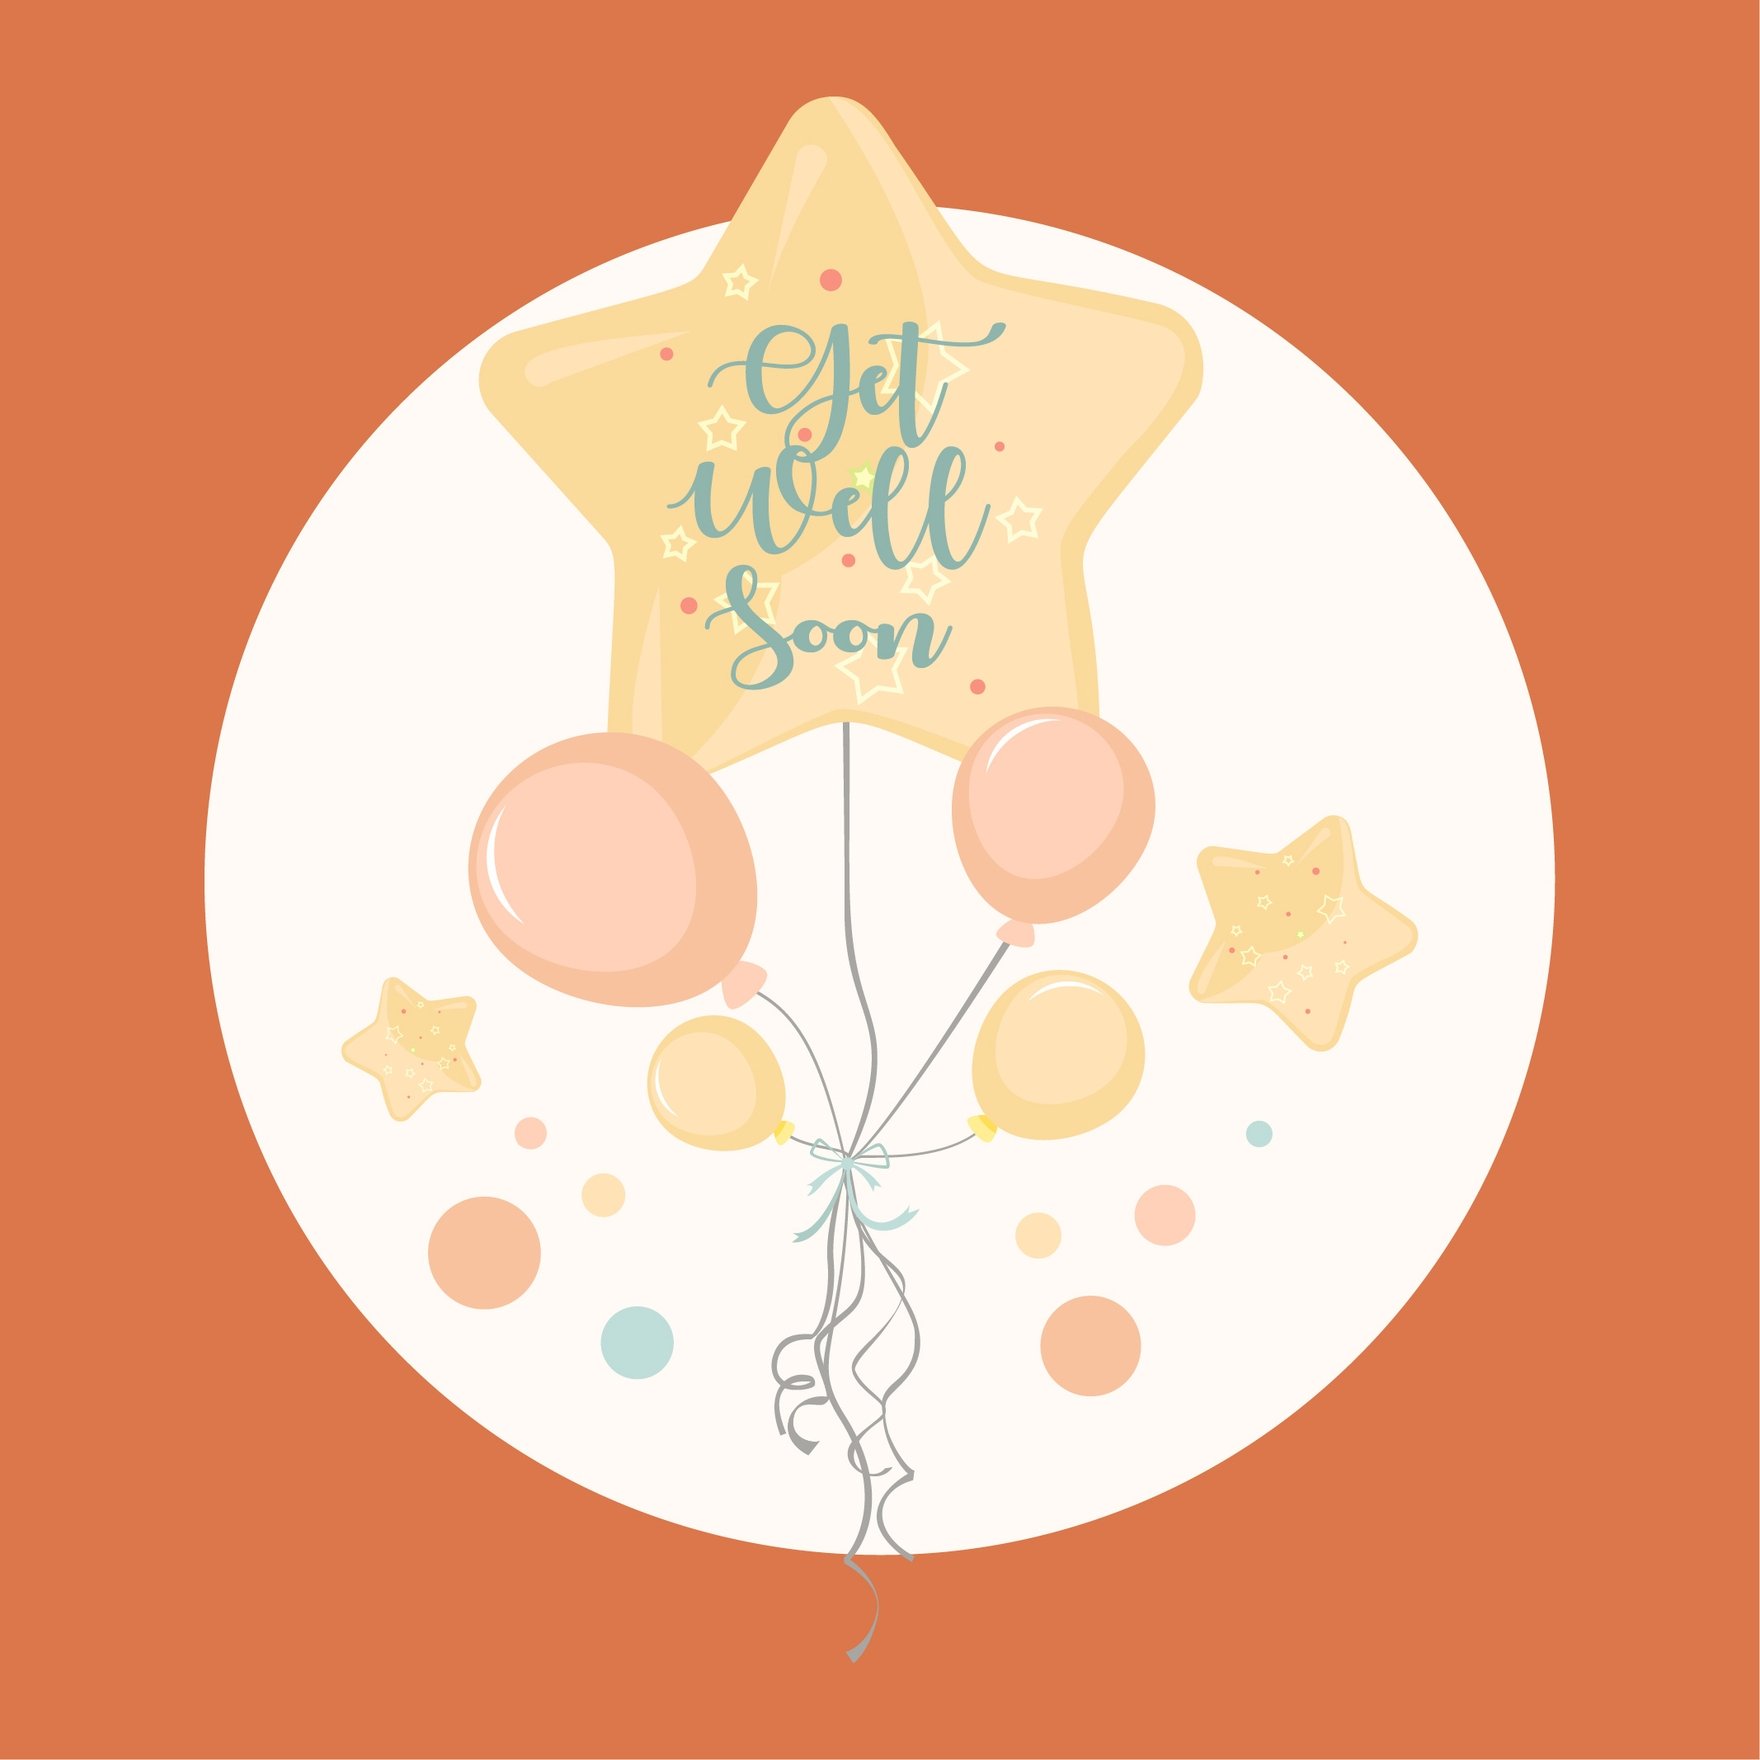 Free Get Well Soon Balloons in Illustrator, EPS, SVG, JPG, PNG